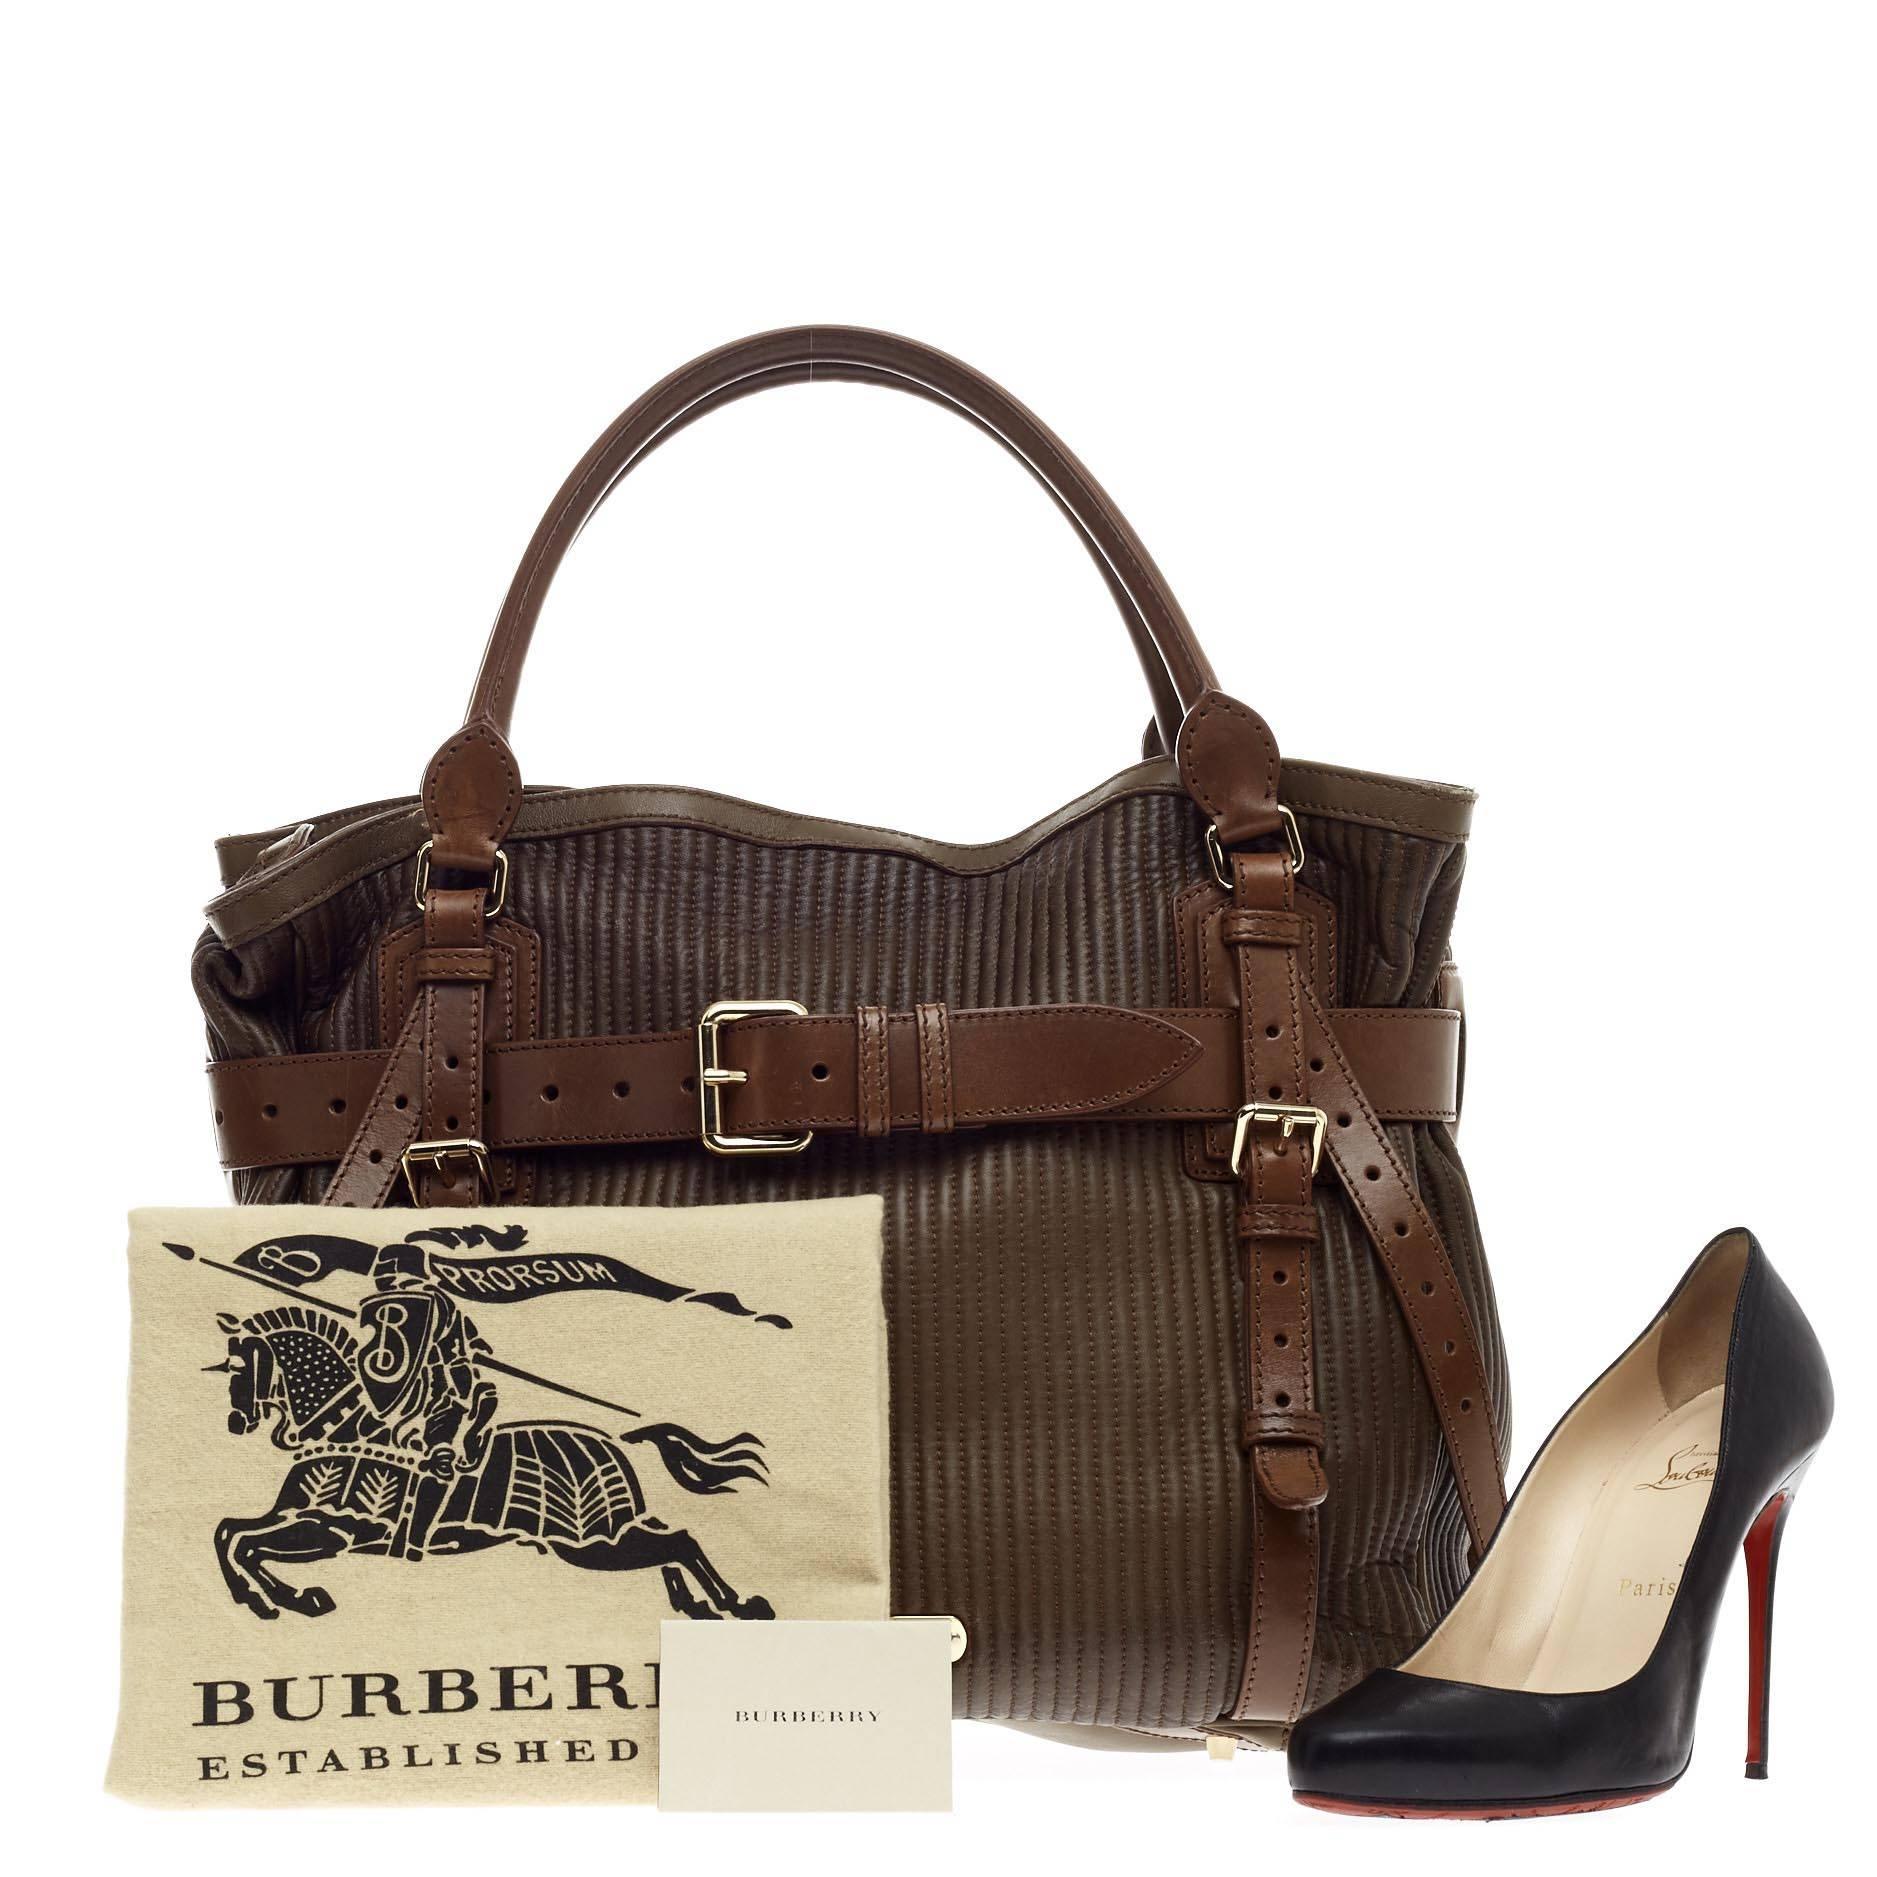 This authentic Burberry Bridle Wilton Tote Stitched Leather Medium is ideal for everyday casual looks or for on-the-go moments. Crafted from toffee brown degrade textured leather, this equestrian-style tote features vertical stitch details,